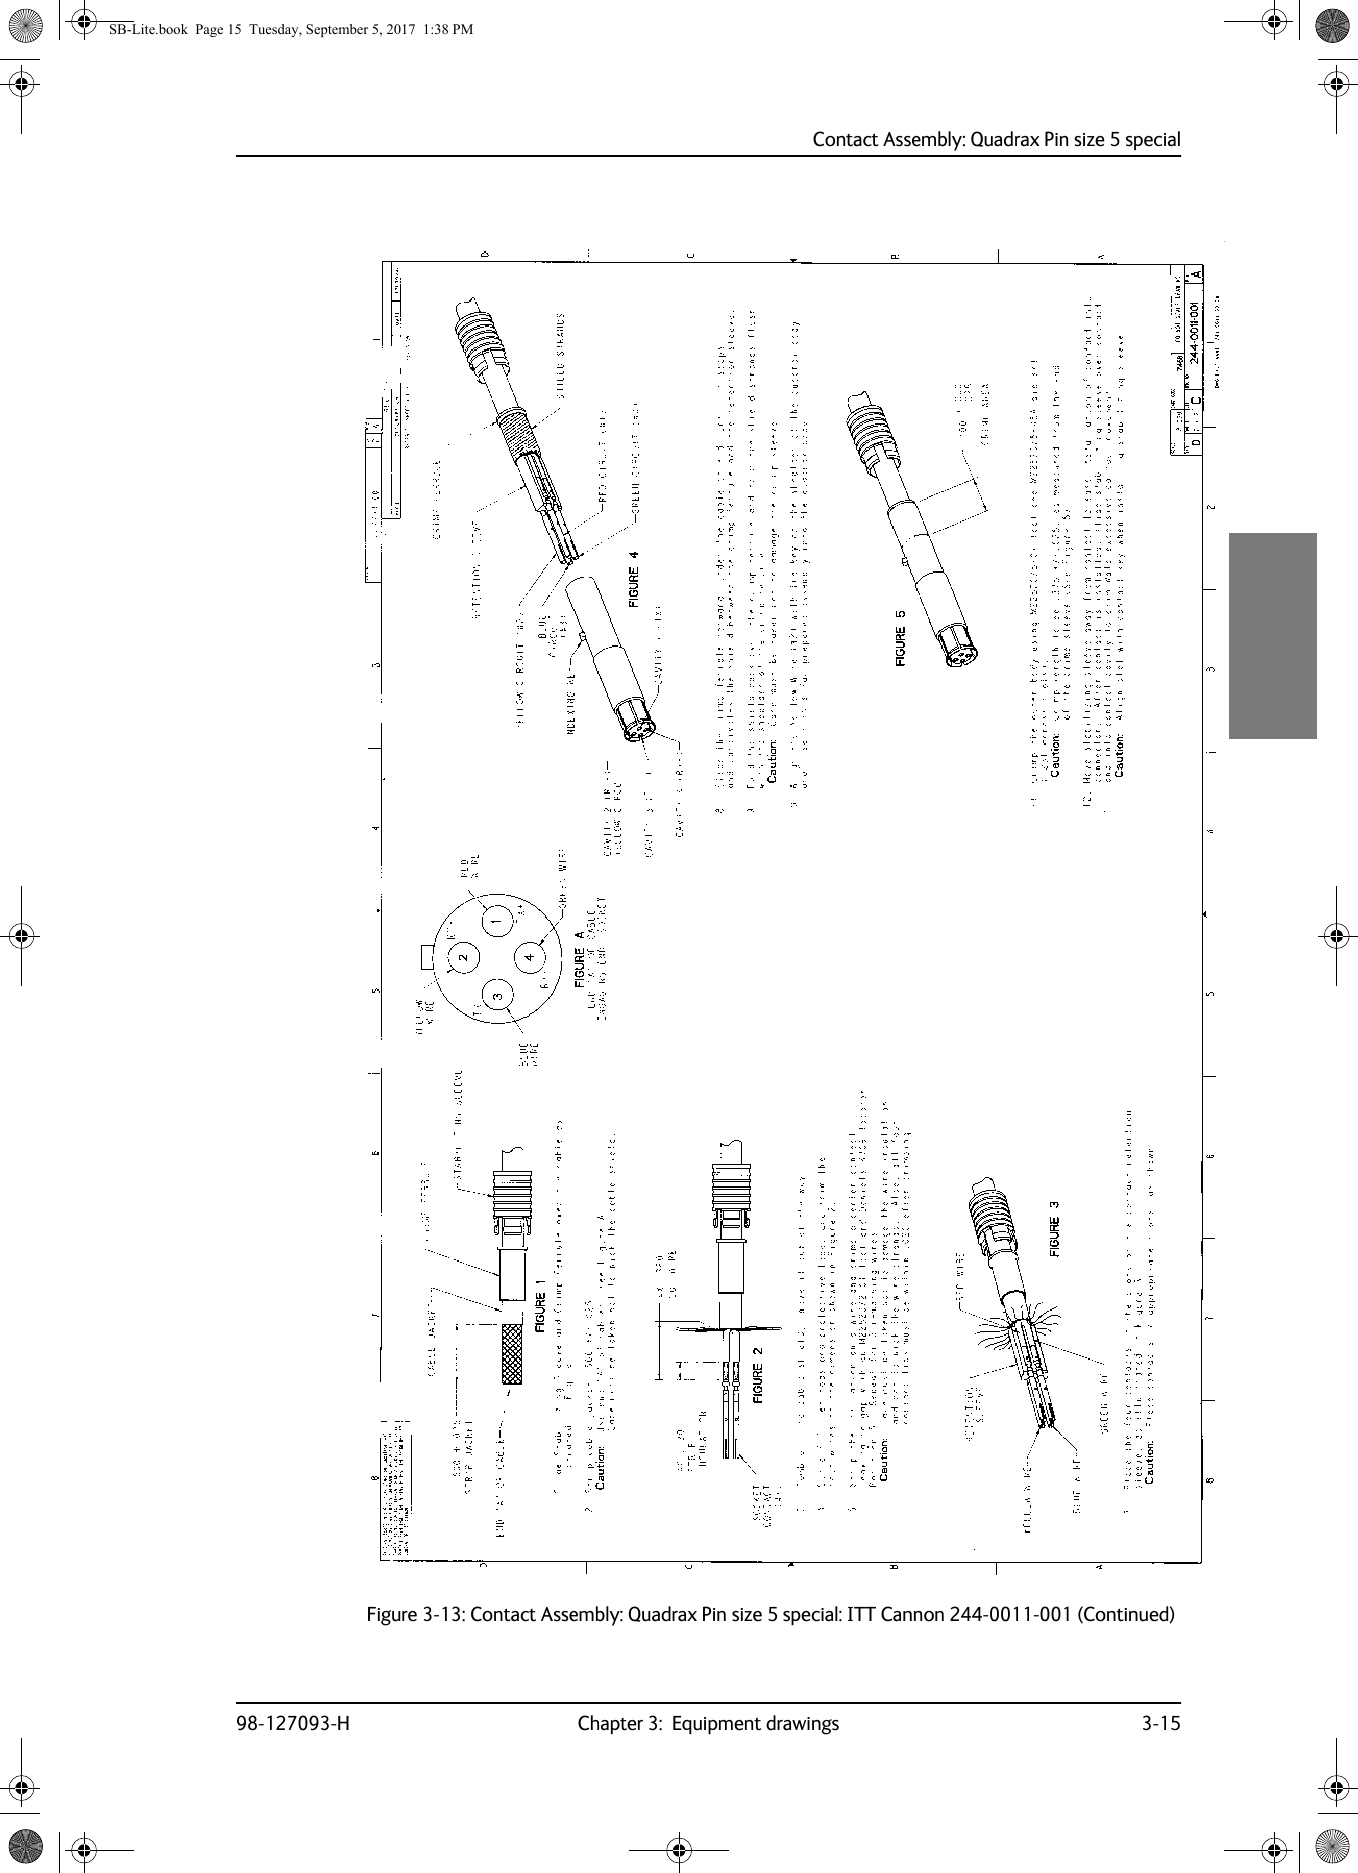 Contact Assembly: Quadrax Pin size 5 special98-127093-H Chapter 3:  Equipment drawings 3-153333Figure 3-13:  Contact Assembly: Quadrax Pin size 5 special: ITT Cannon 244-0011-001 (Continued)SB-Lite.book  Page 15  Tuesday, September 5, 2017  1:38 PM